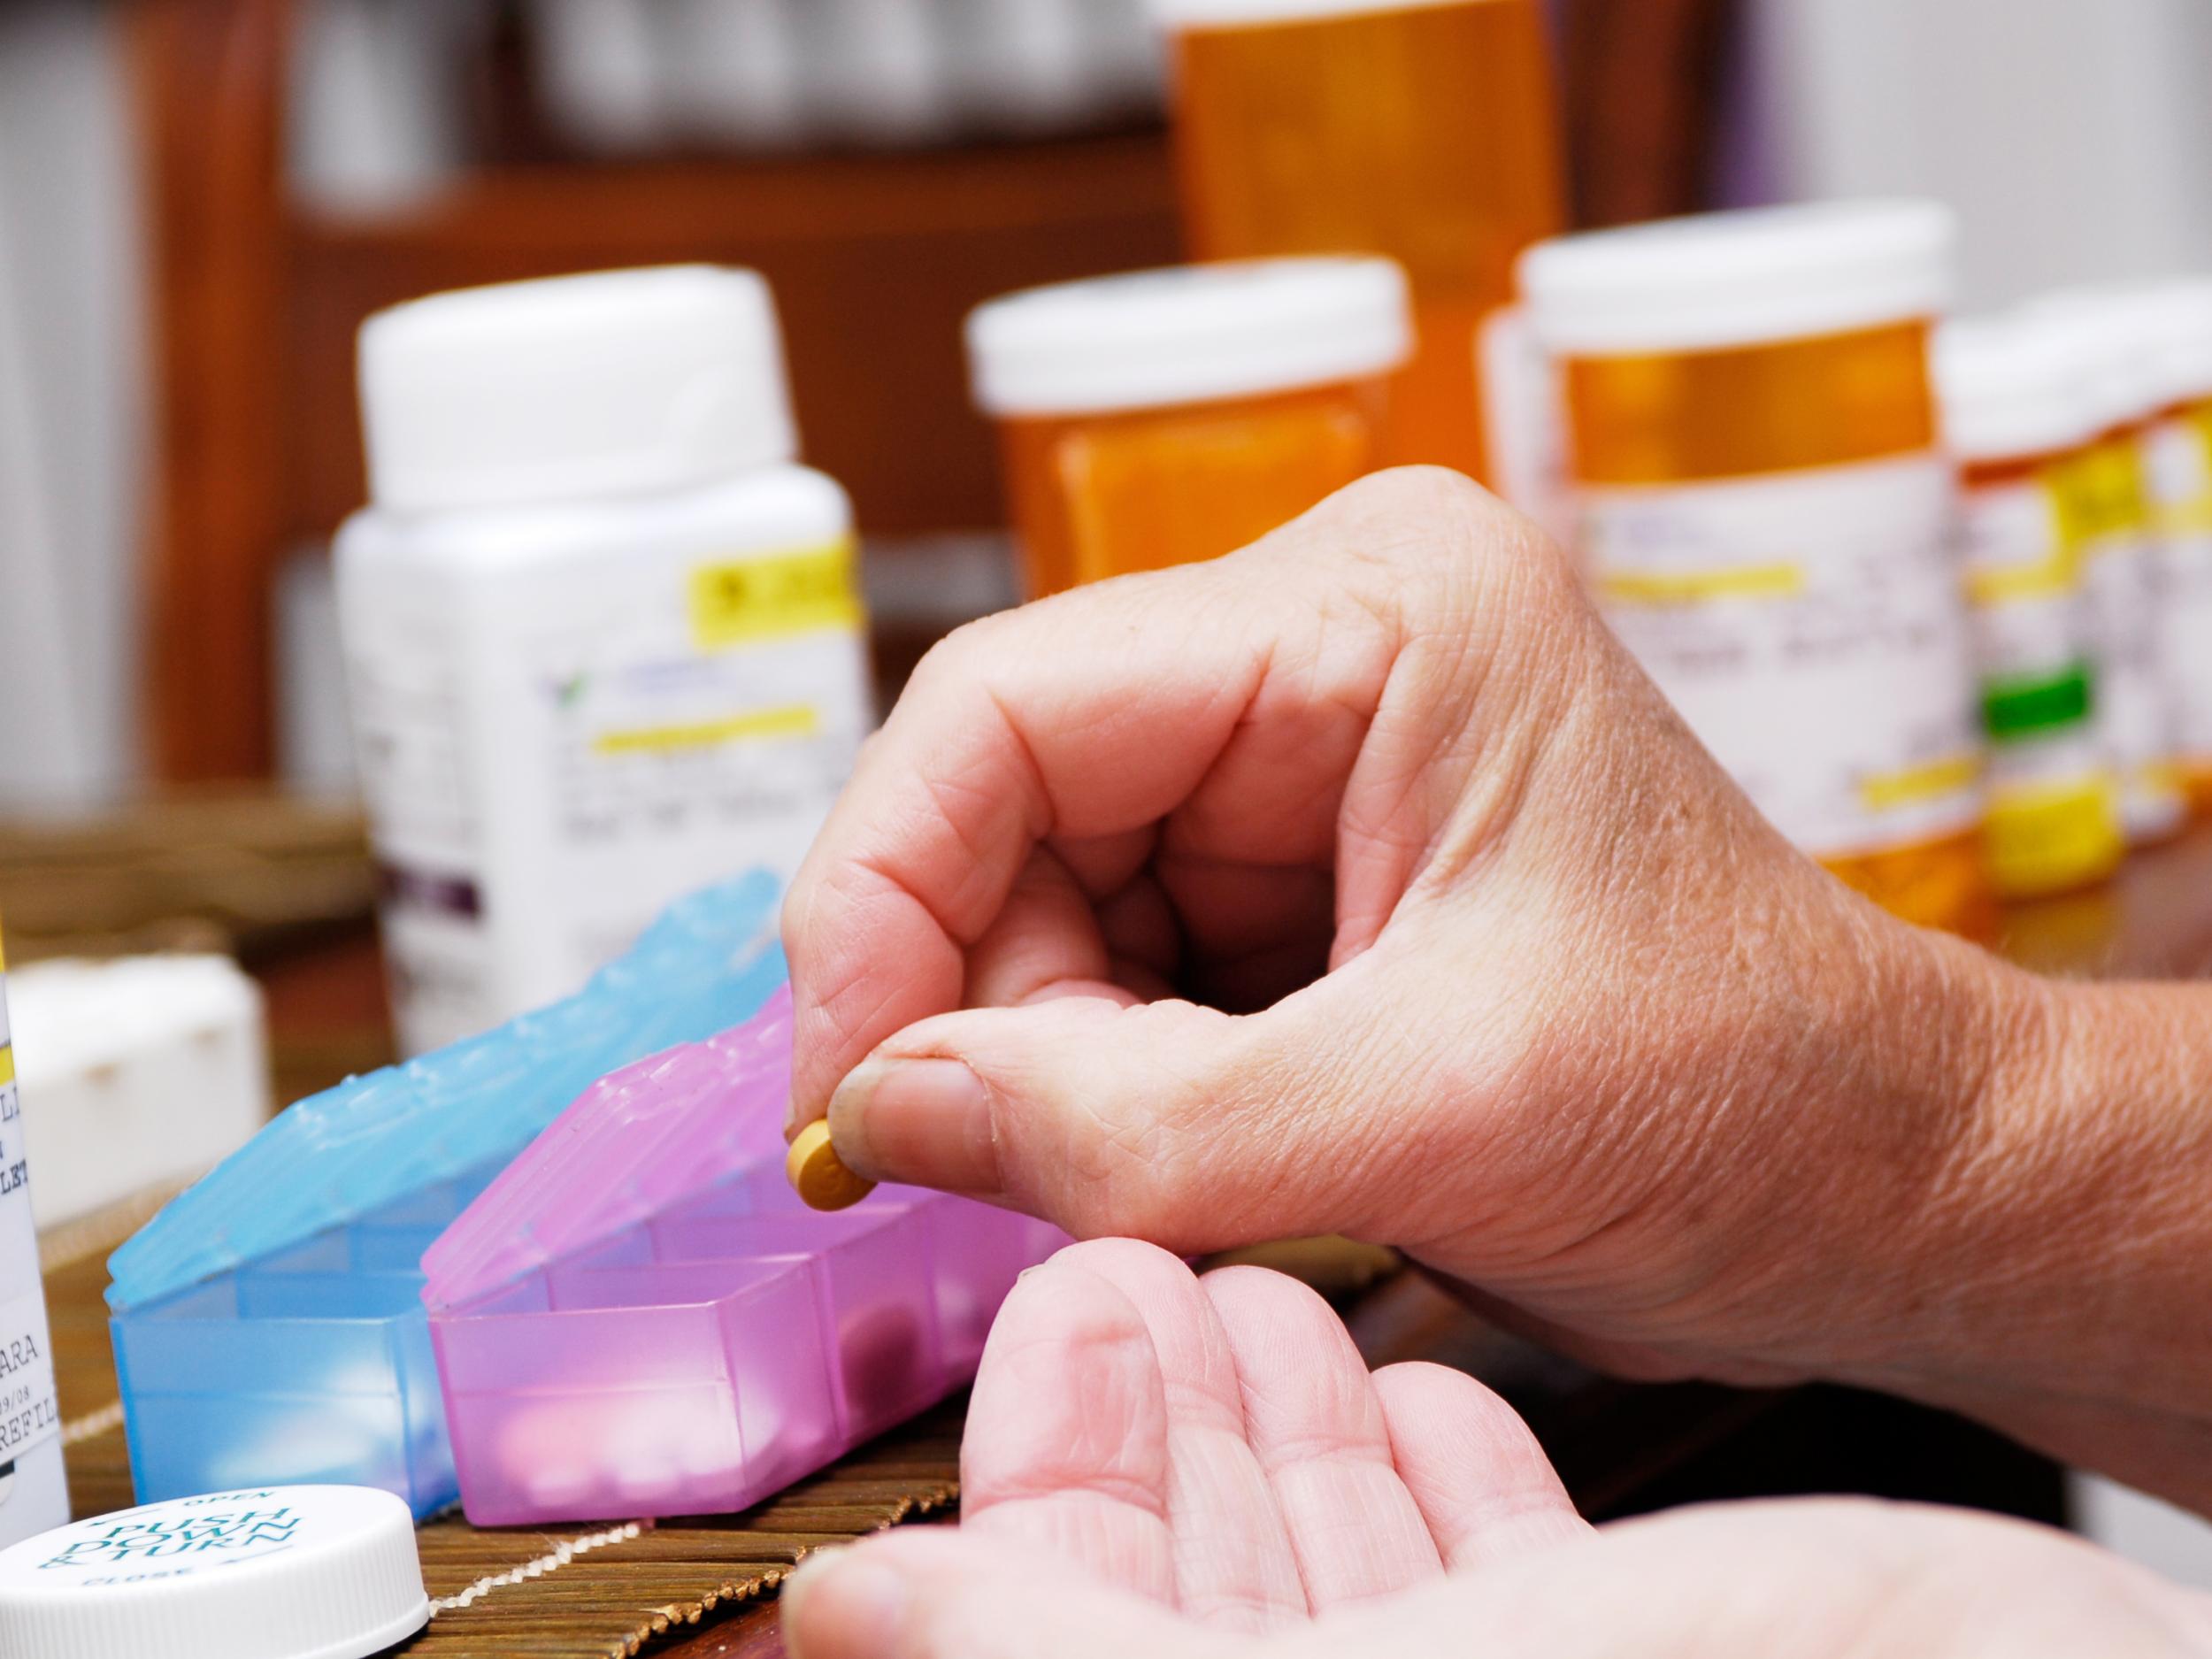 Elderly patients may be being put at risk by needless medication